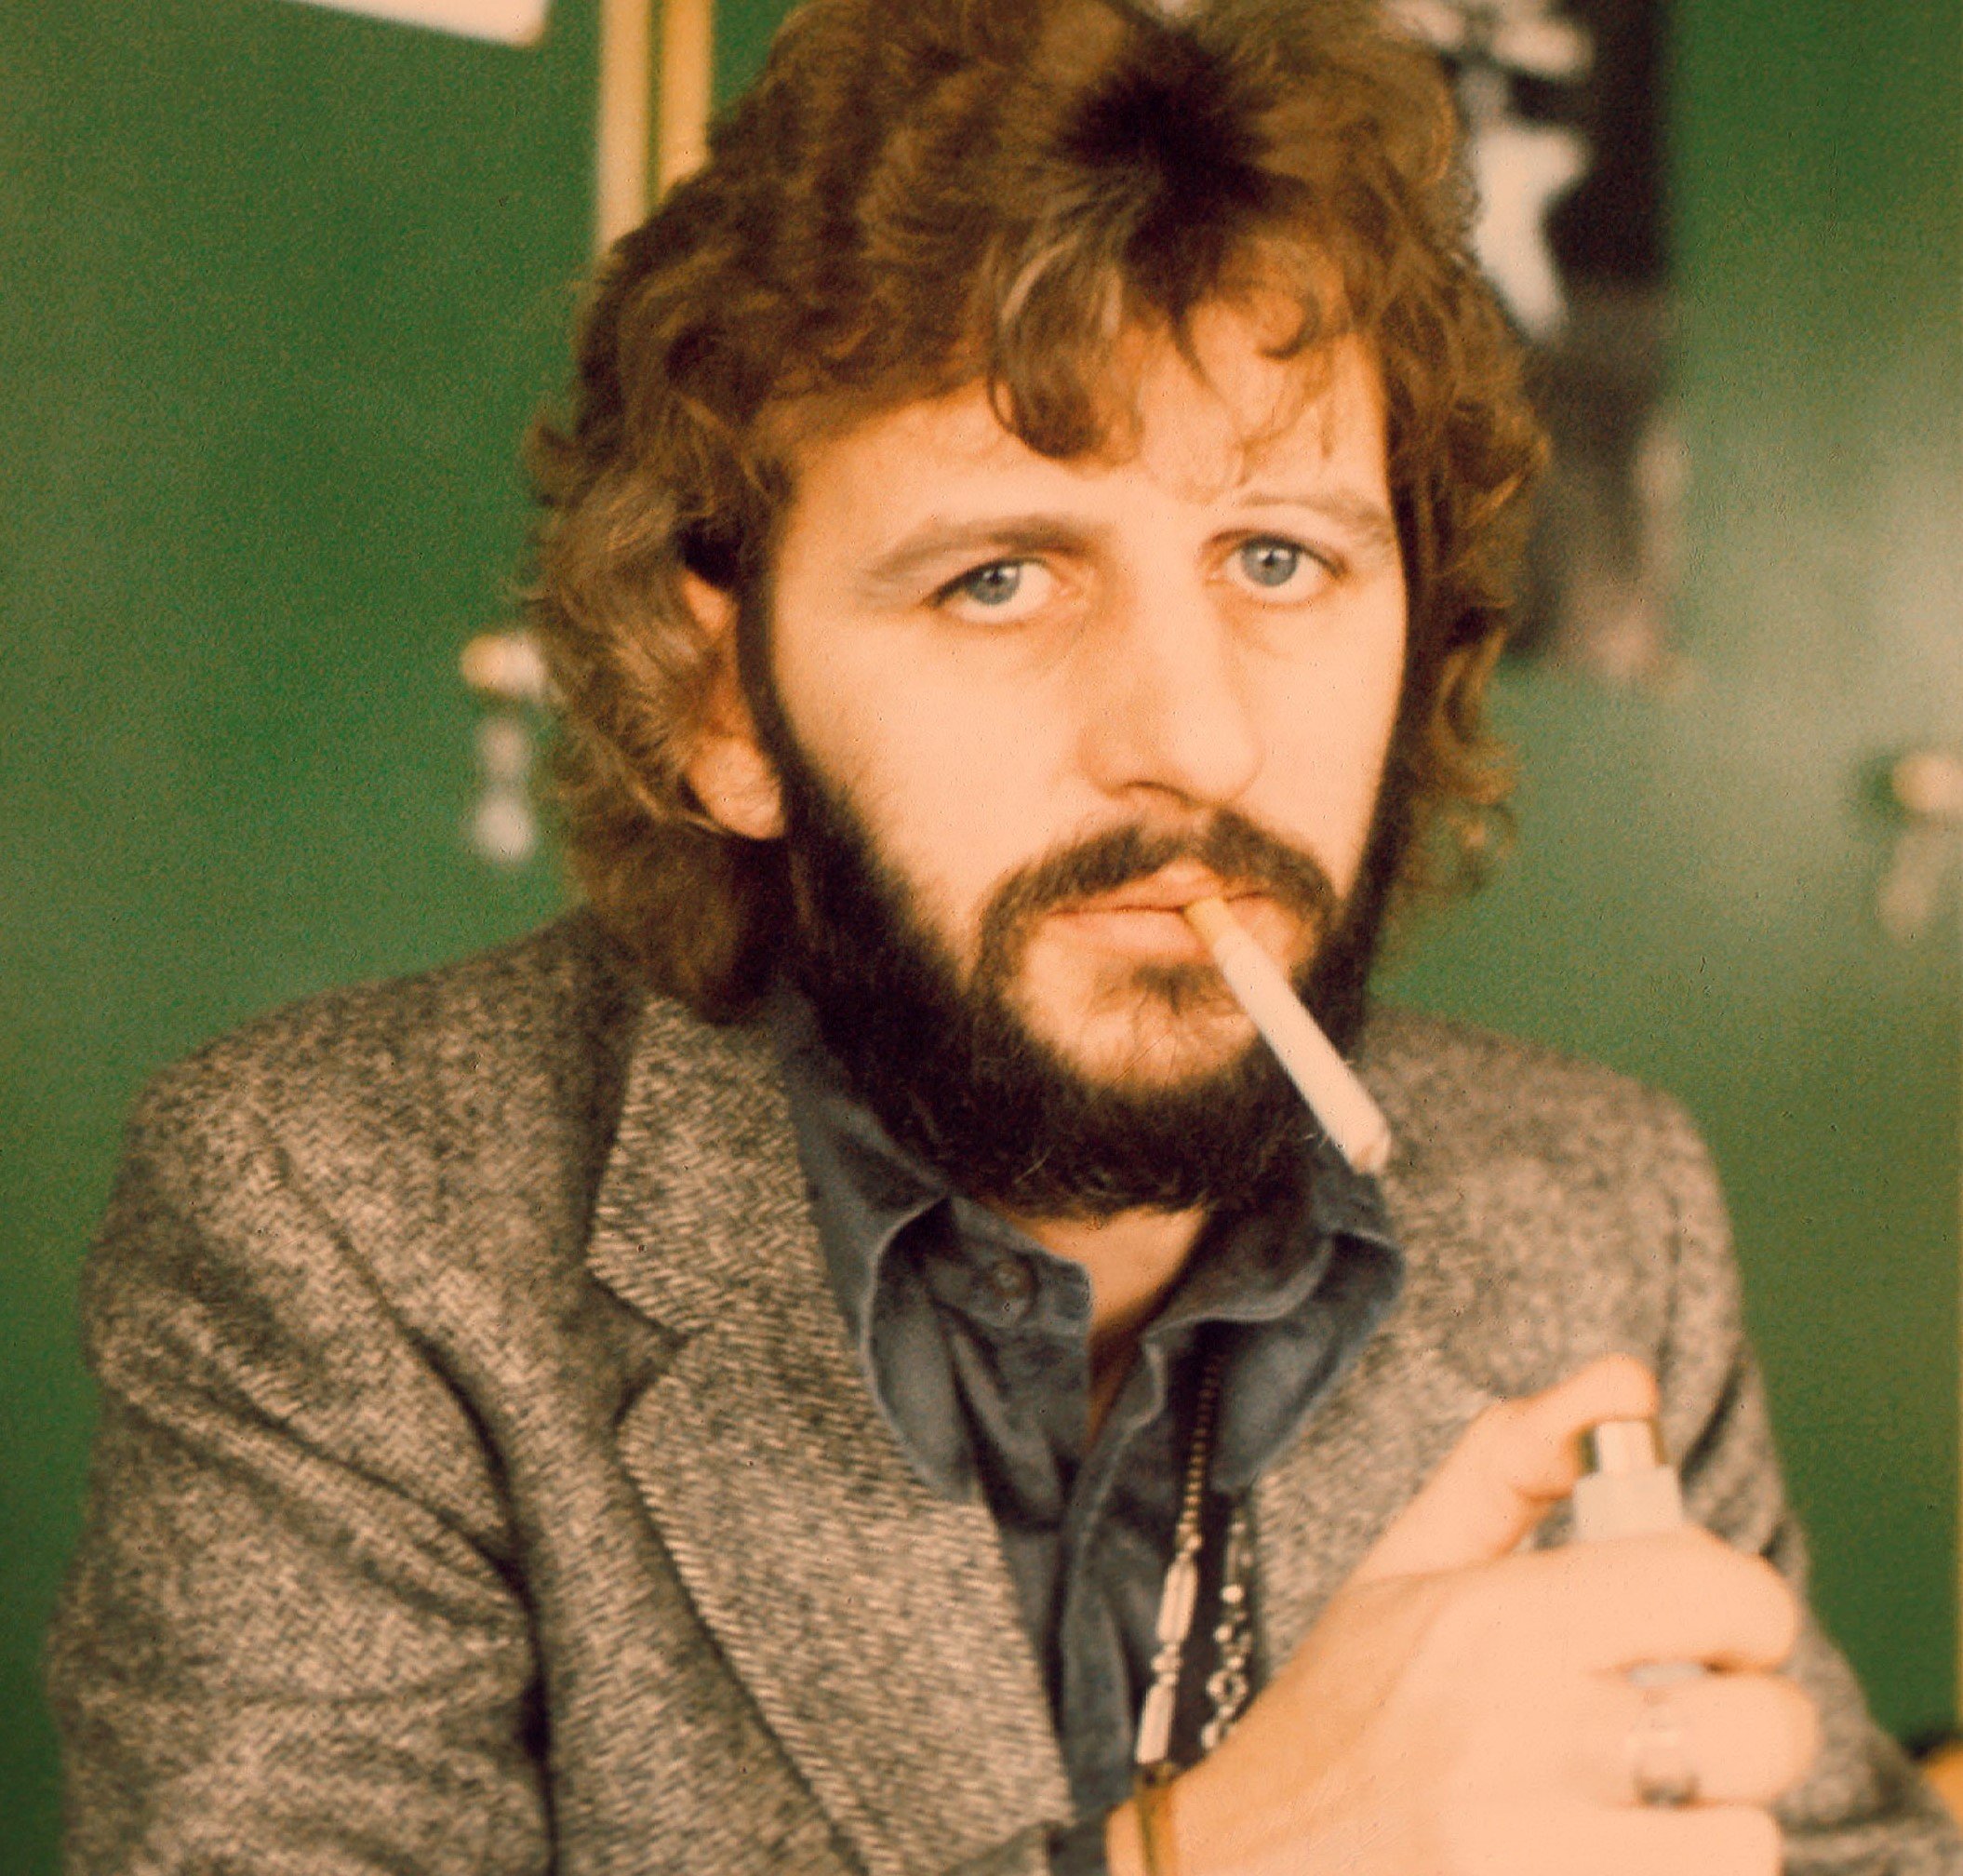 Ringo Starr Designed 1 of His Albums to Hit No. 1 and He Failed